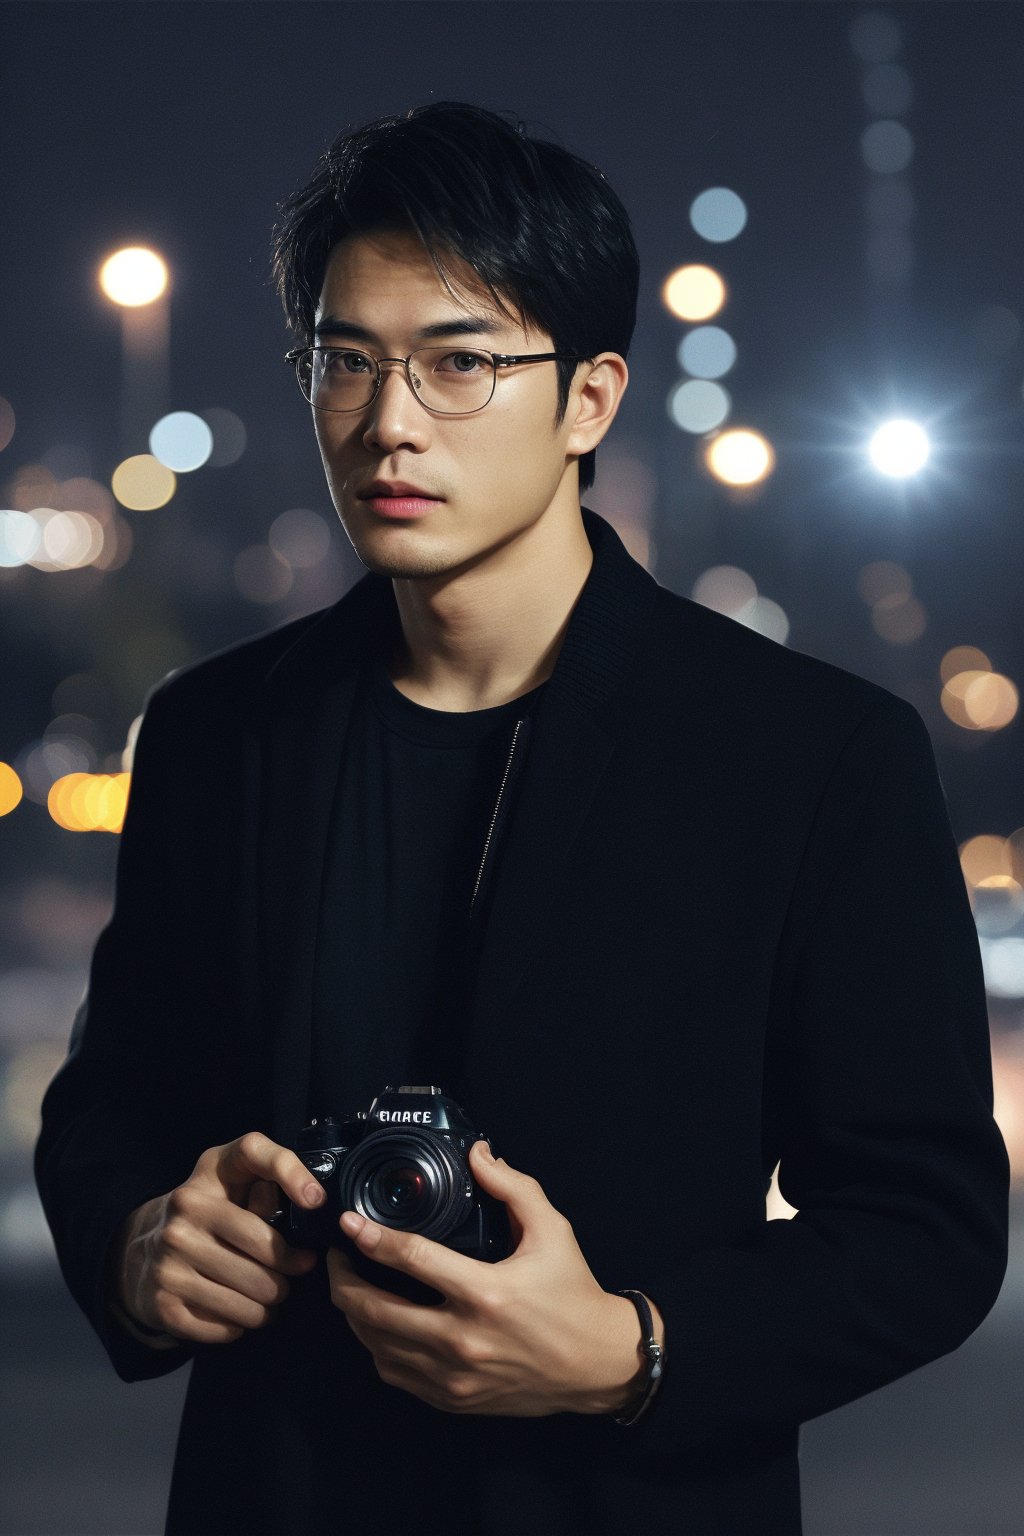 professional photography, RAW photo, HDR, UHD, 64K, perfect composition, natural lighting, handsome ,asina man,  realistic ,glasses ,stubble , Asian man,flash,flashlight, cityscape